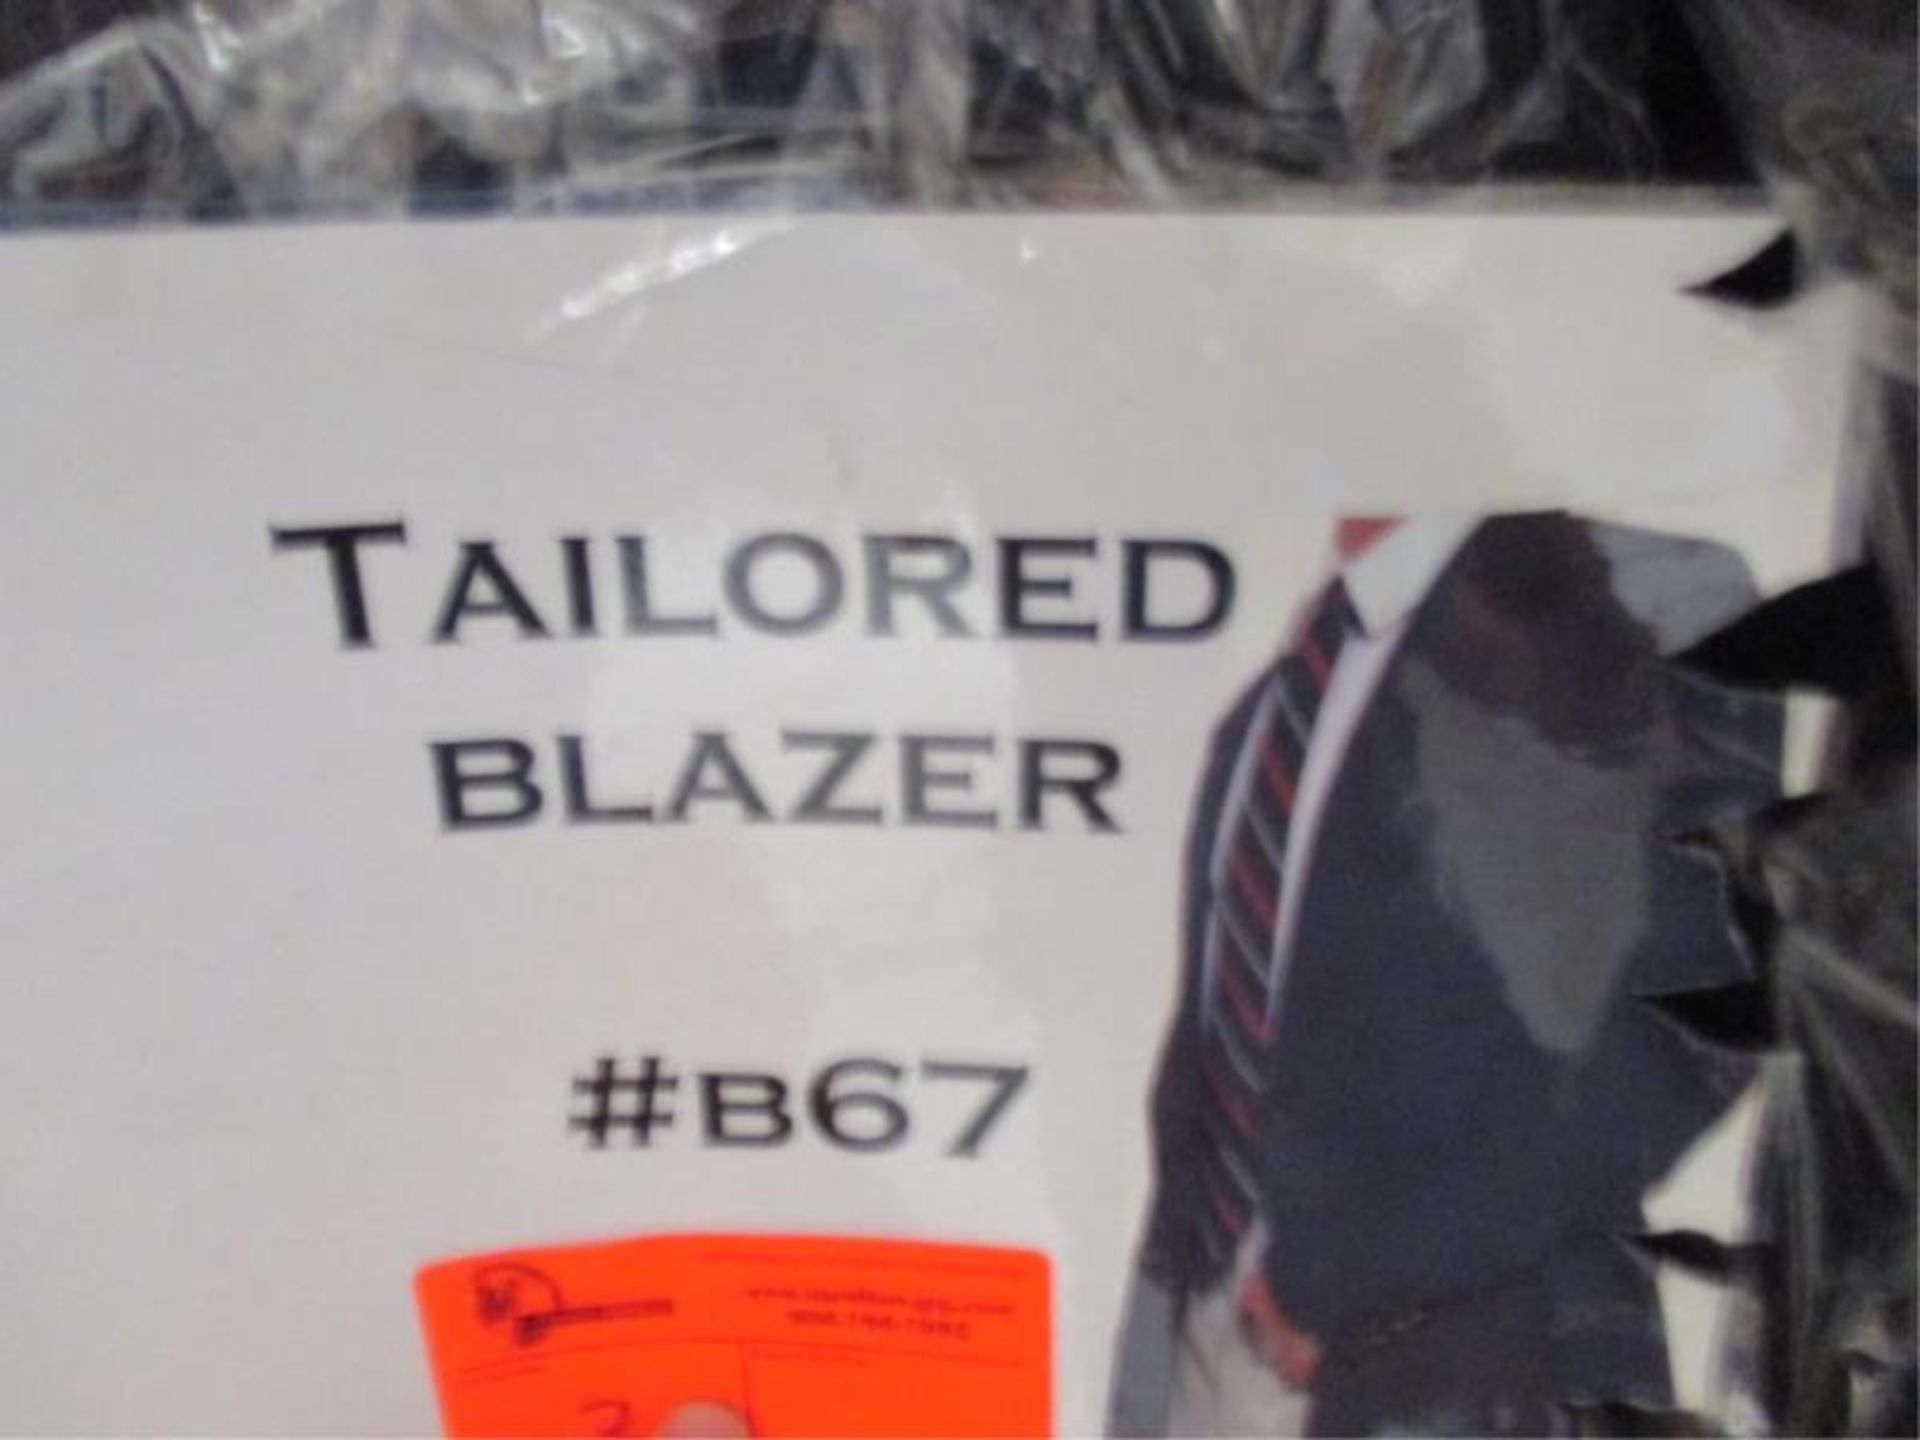 Tailored Blazer, Approx. 68 Men's Sizes: 36-50L, By Gino Cappeli Felix, Chaps - Image 9 of 9